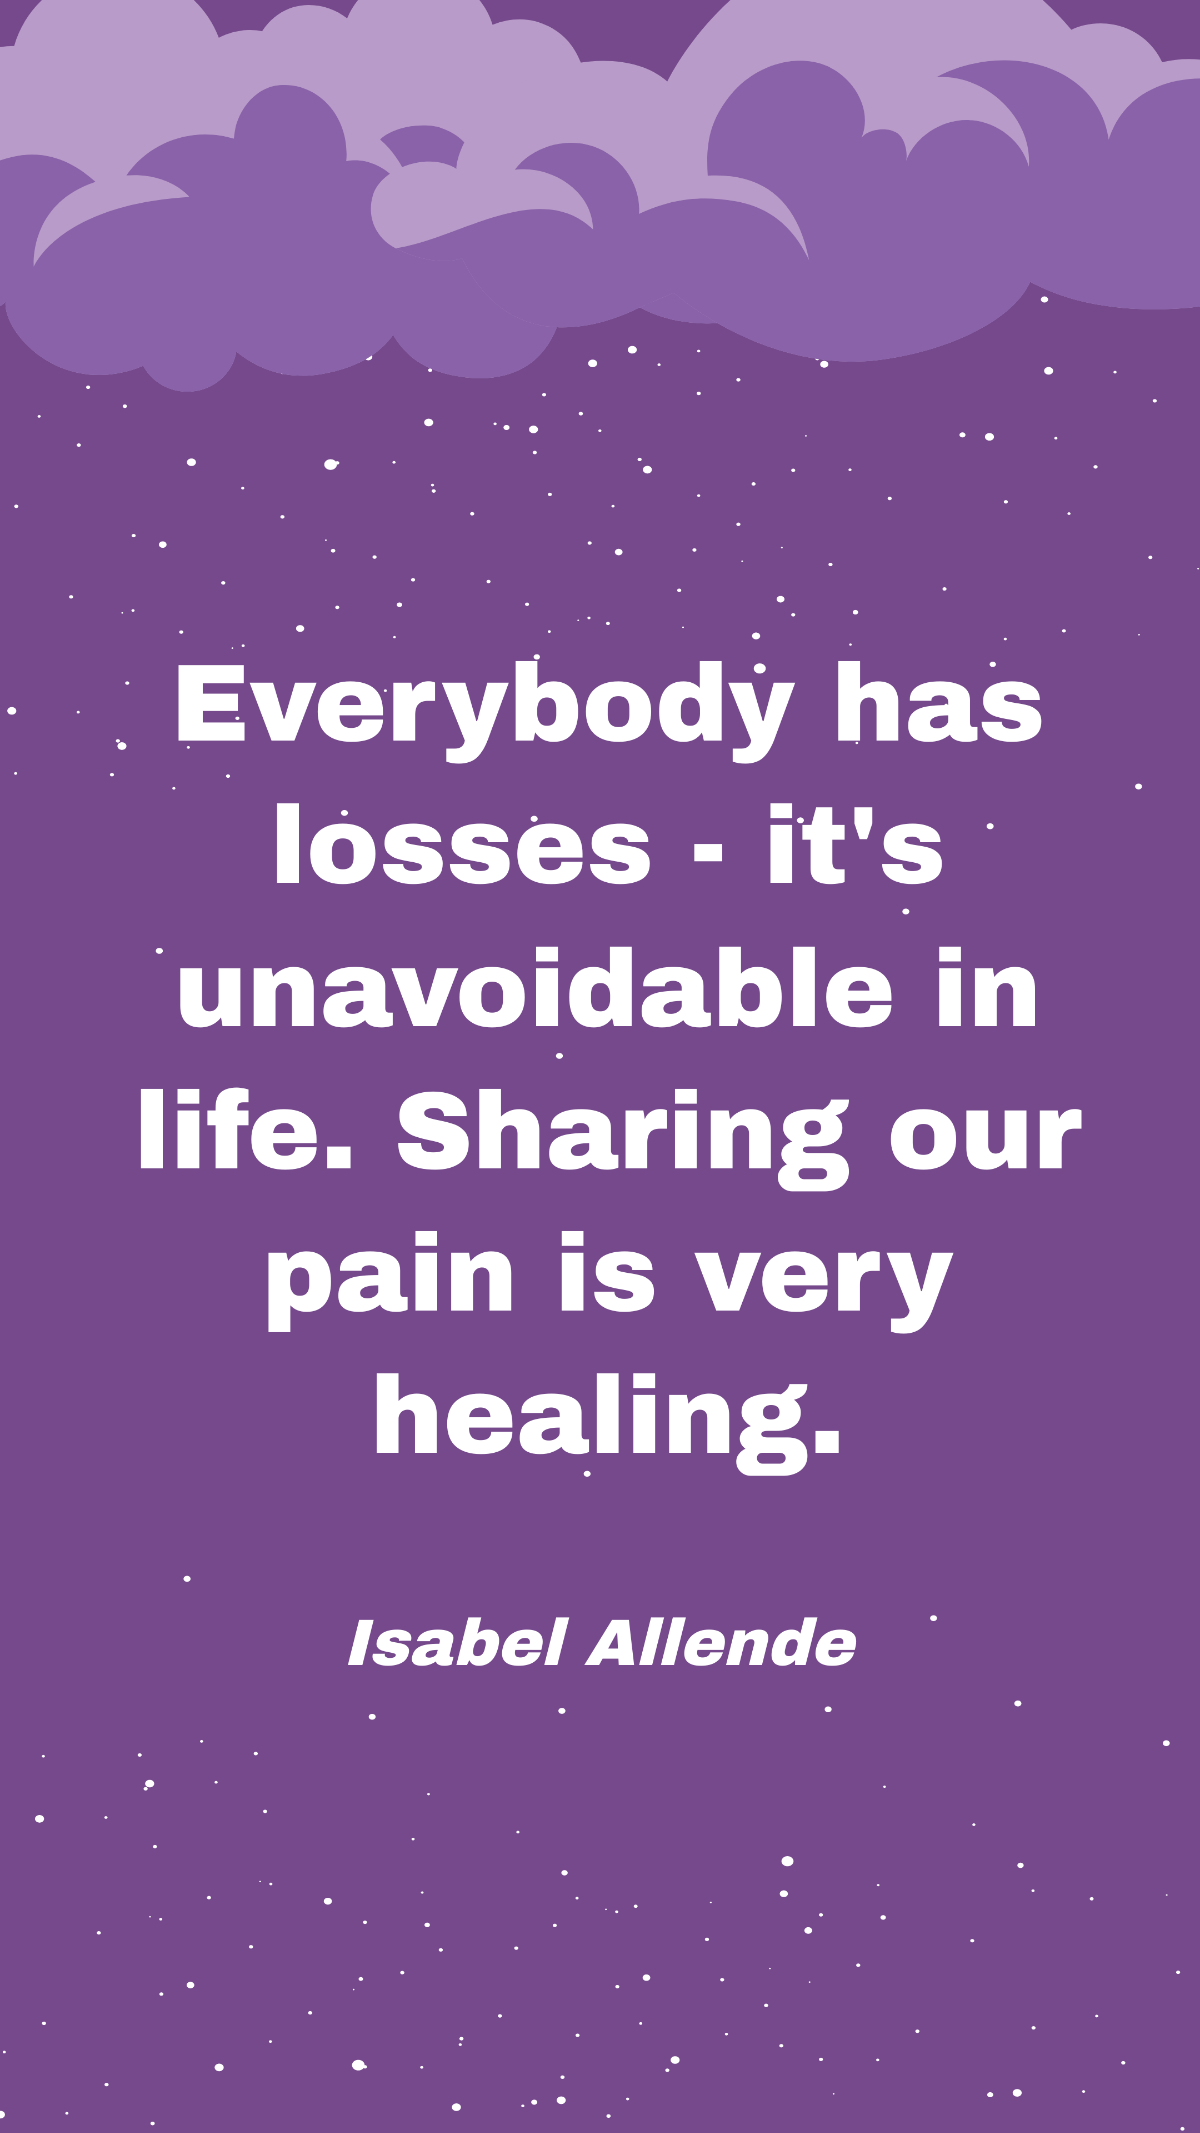 Isabel Allende - Everybody has losses - it's unavoidable in life. Sharing our pain is very healing.